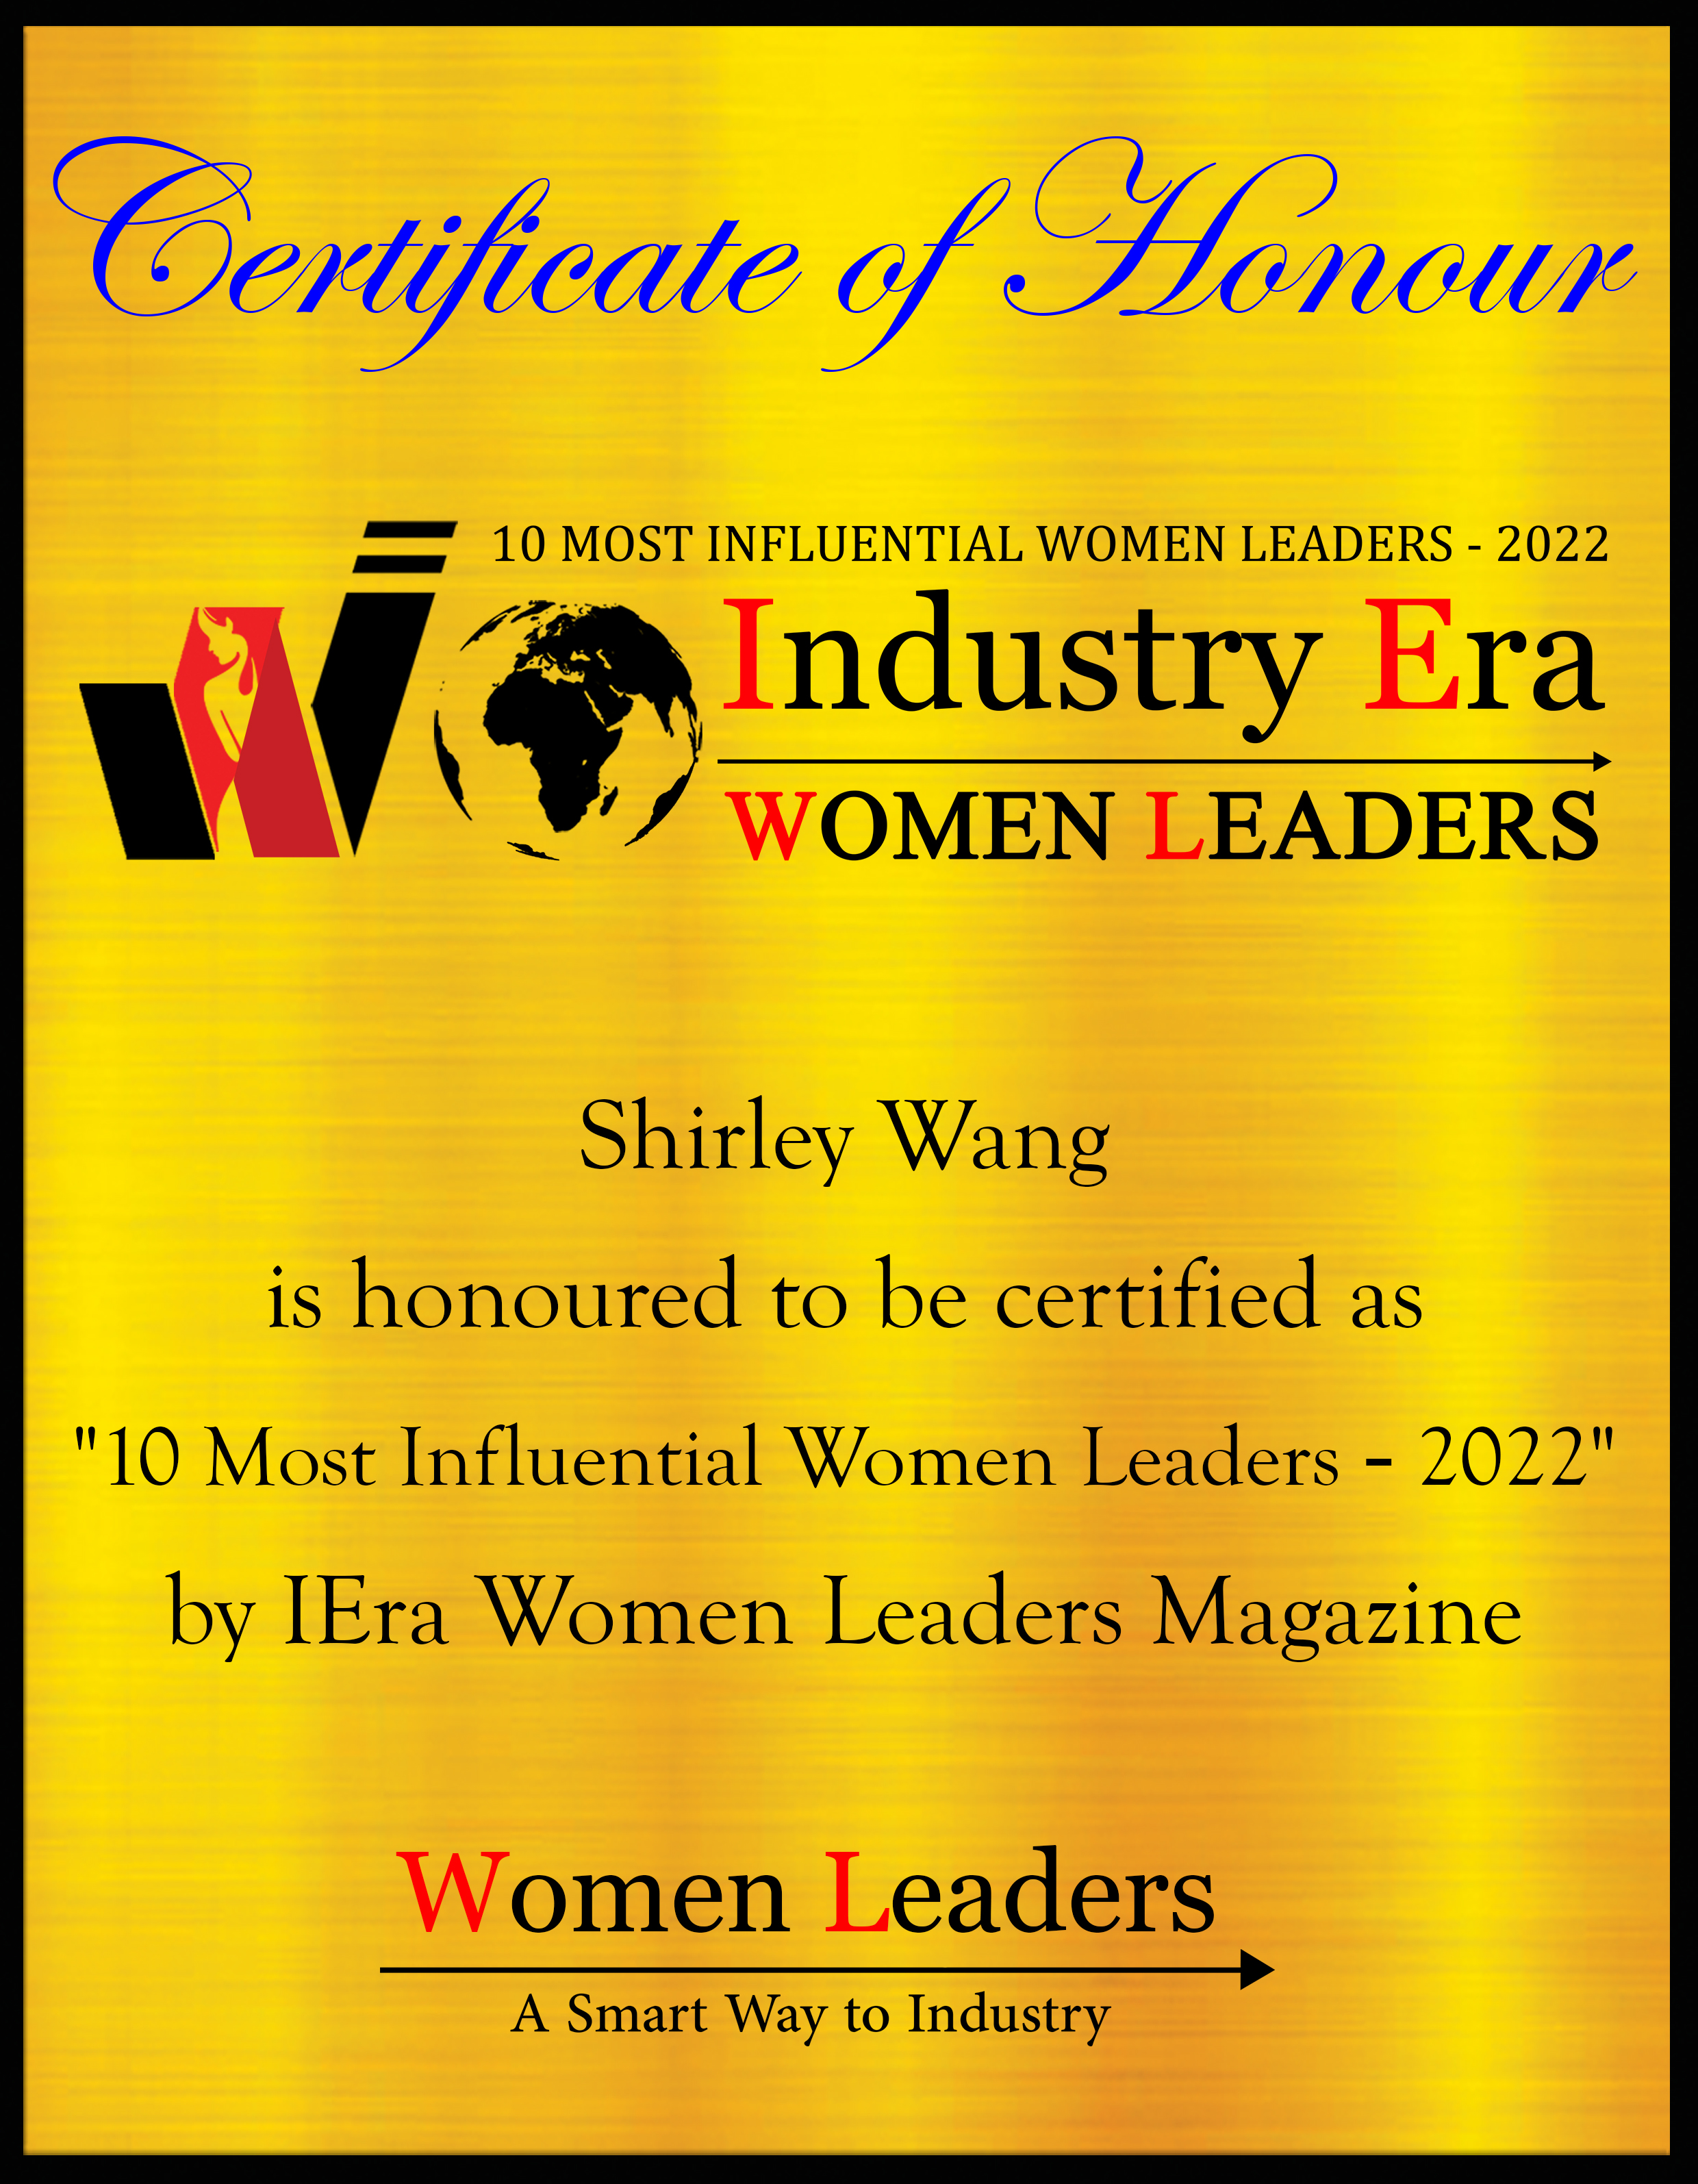 Shirley Wang, Founder & CEO of Plastpro Inc, 10 Most Influential Women Leaders of 2022